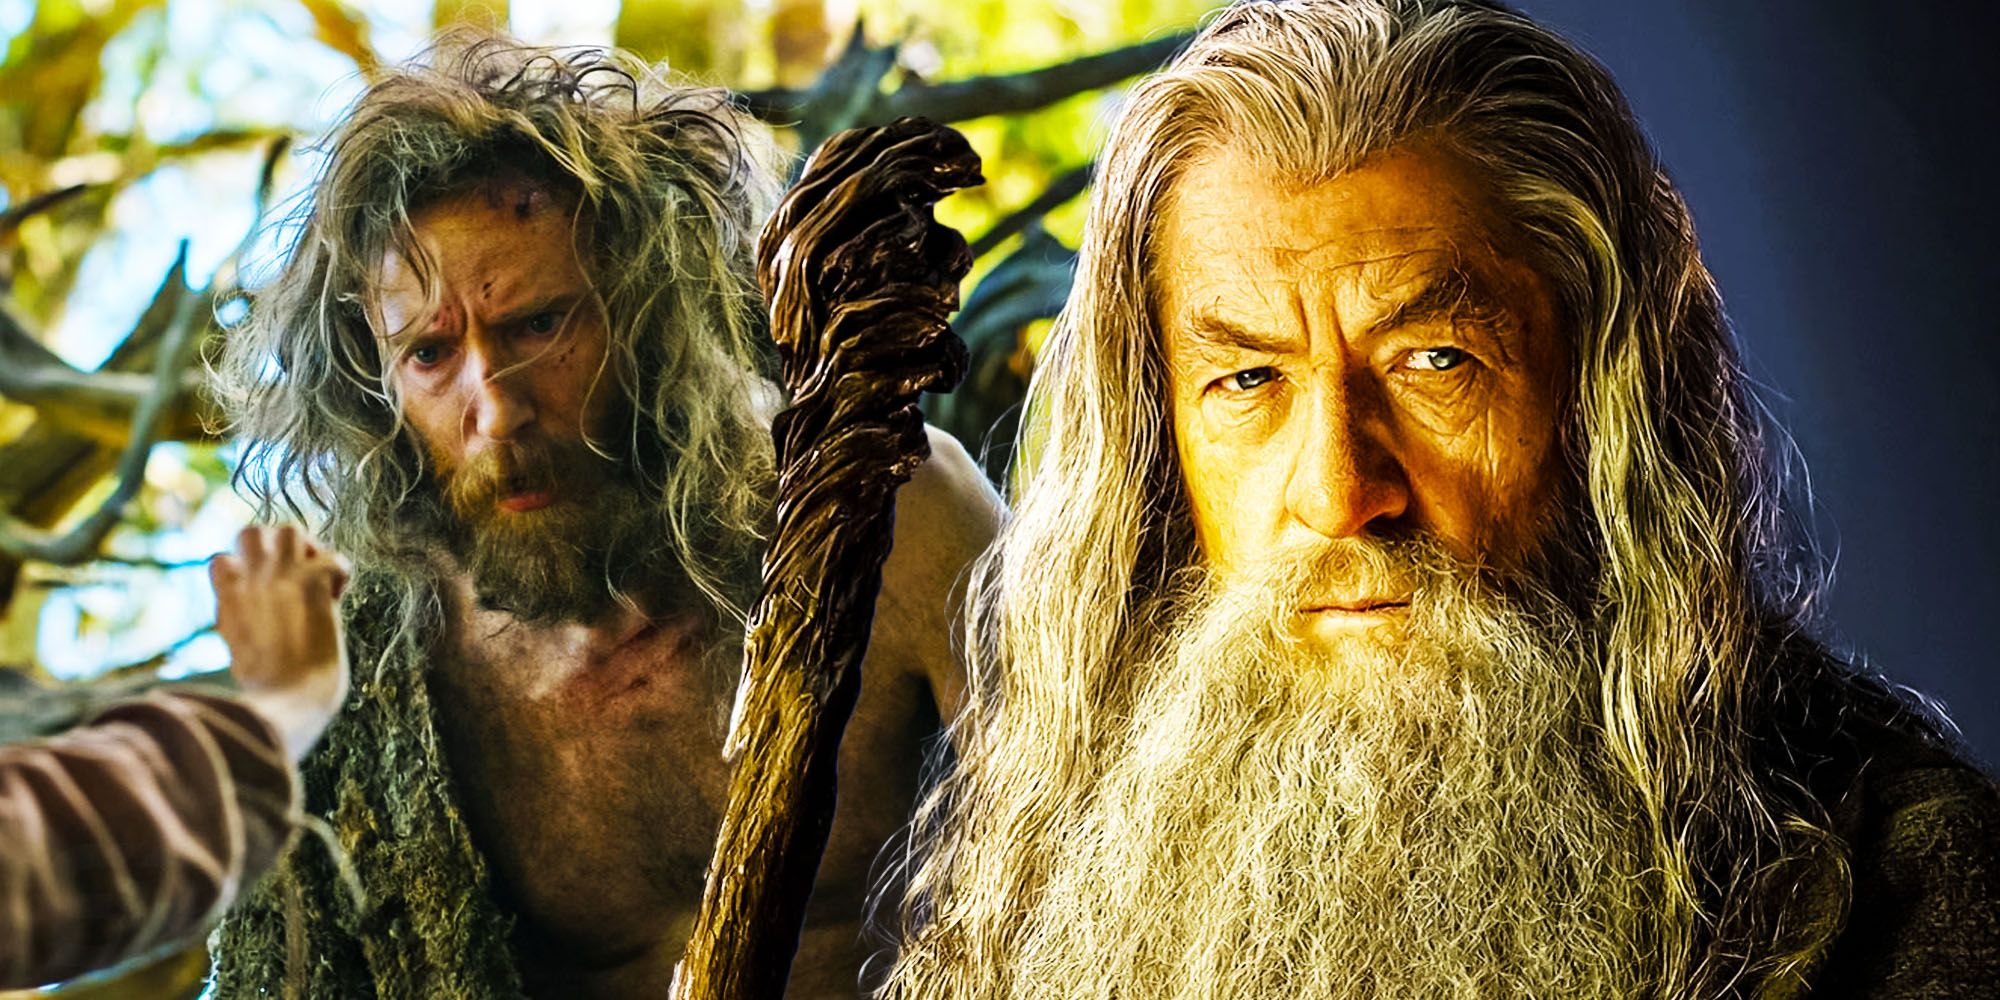 The Rings Of Power Drops Another Big Gandalf Clue In Season 2’s Trailer